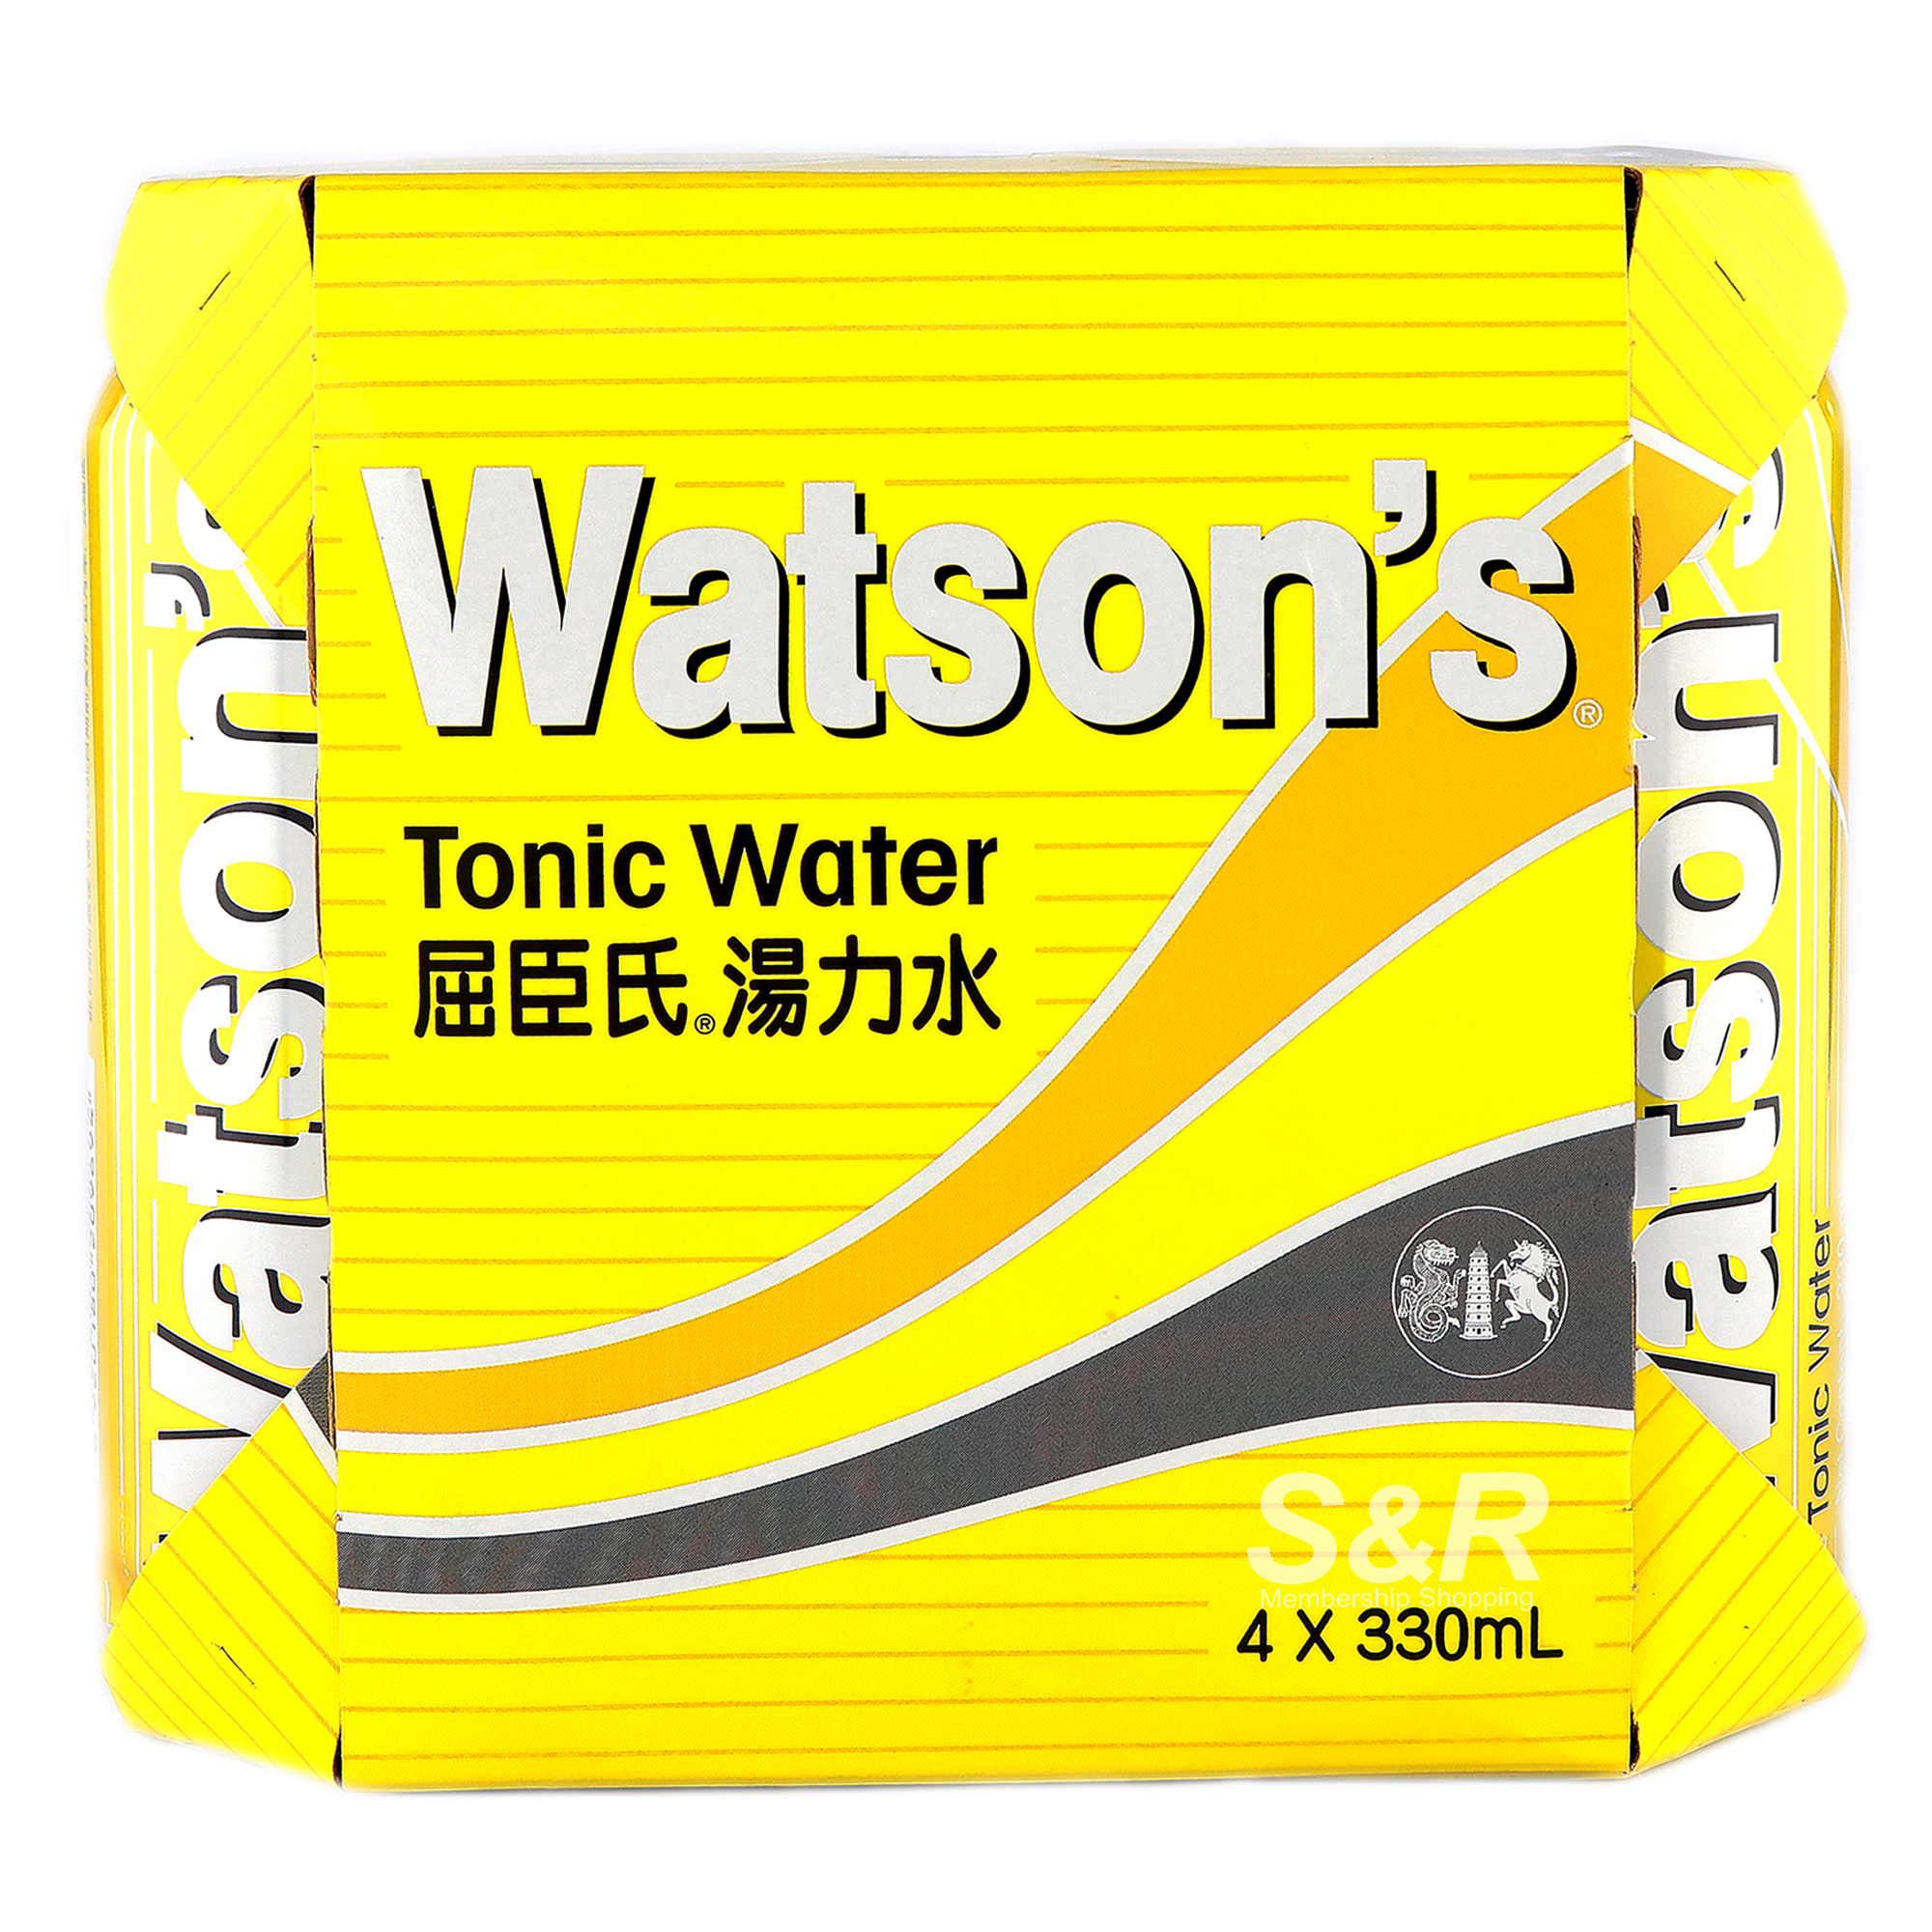 Watson's Tonic Water 4 cans